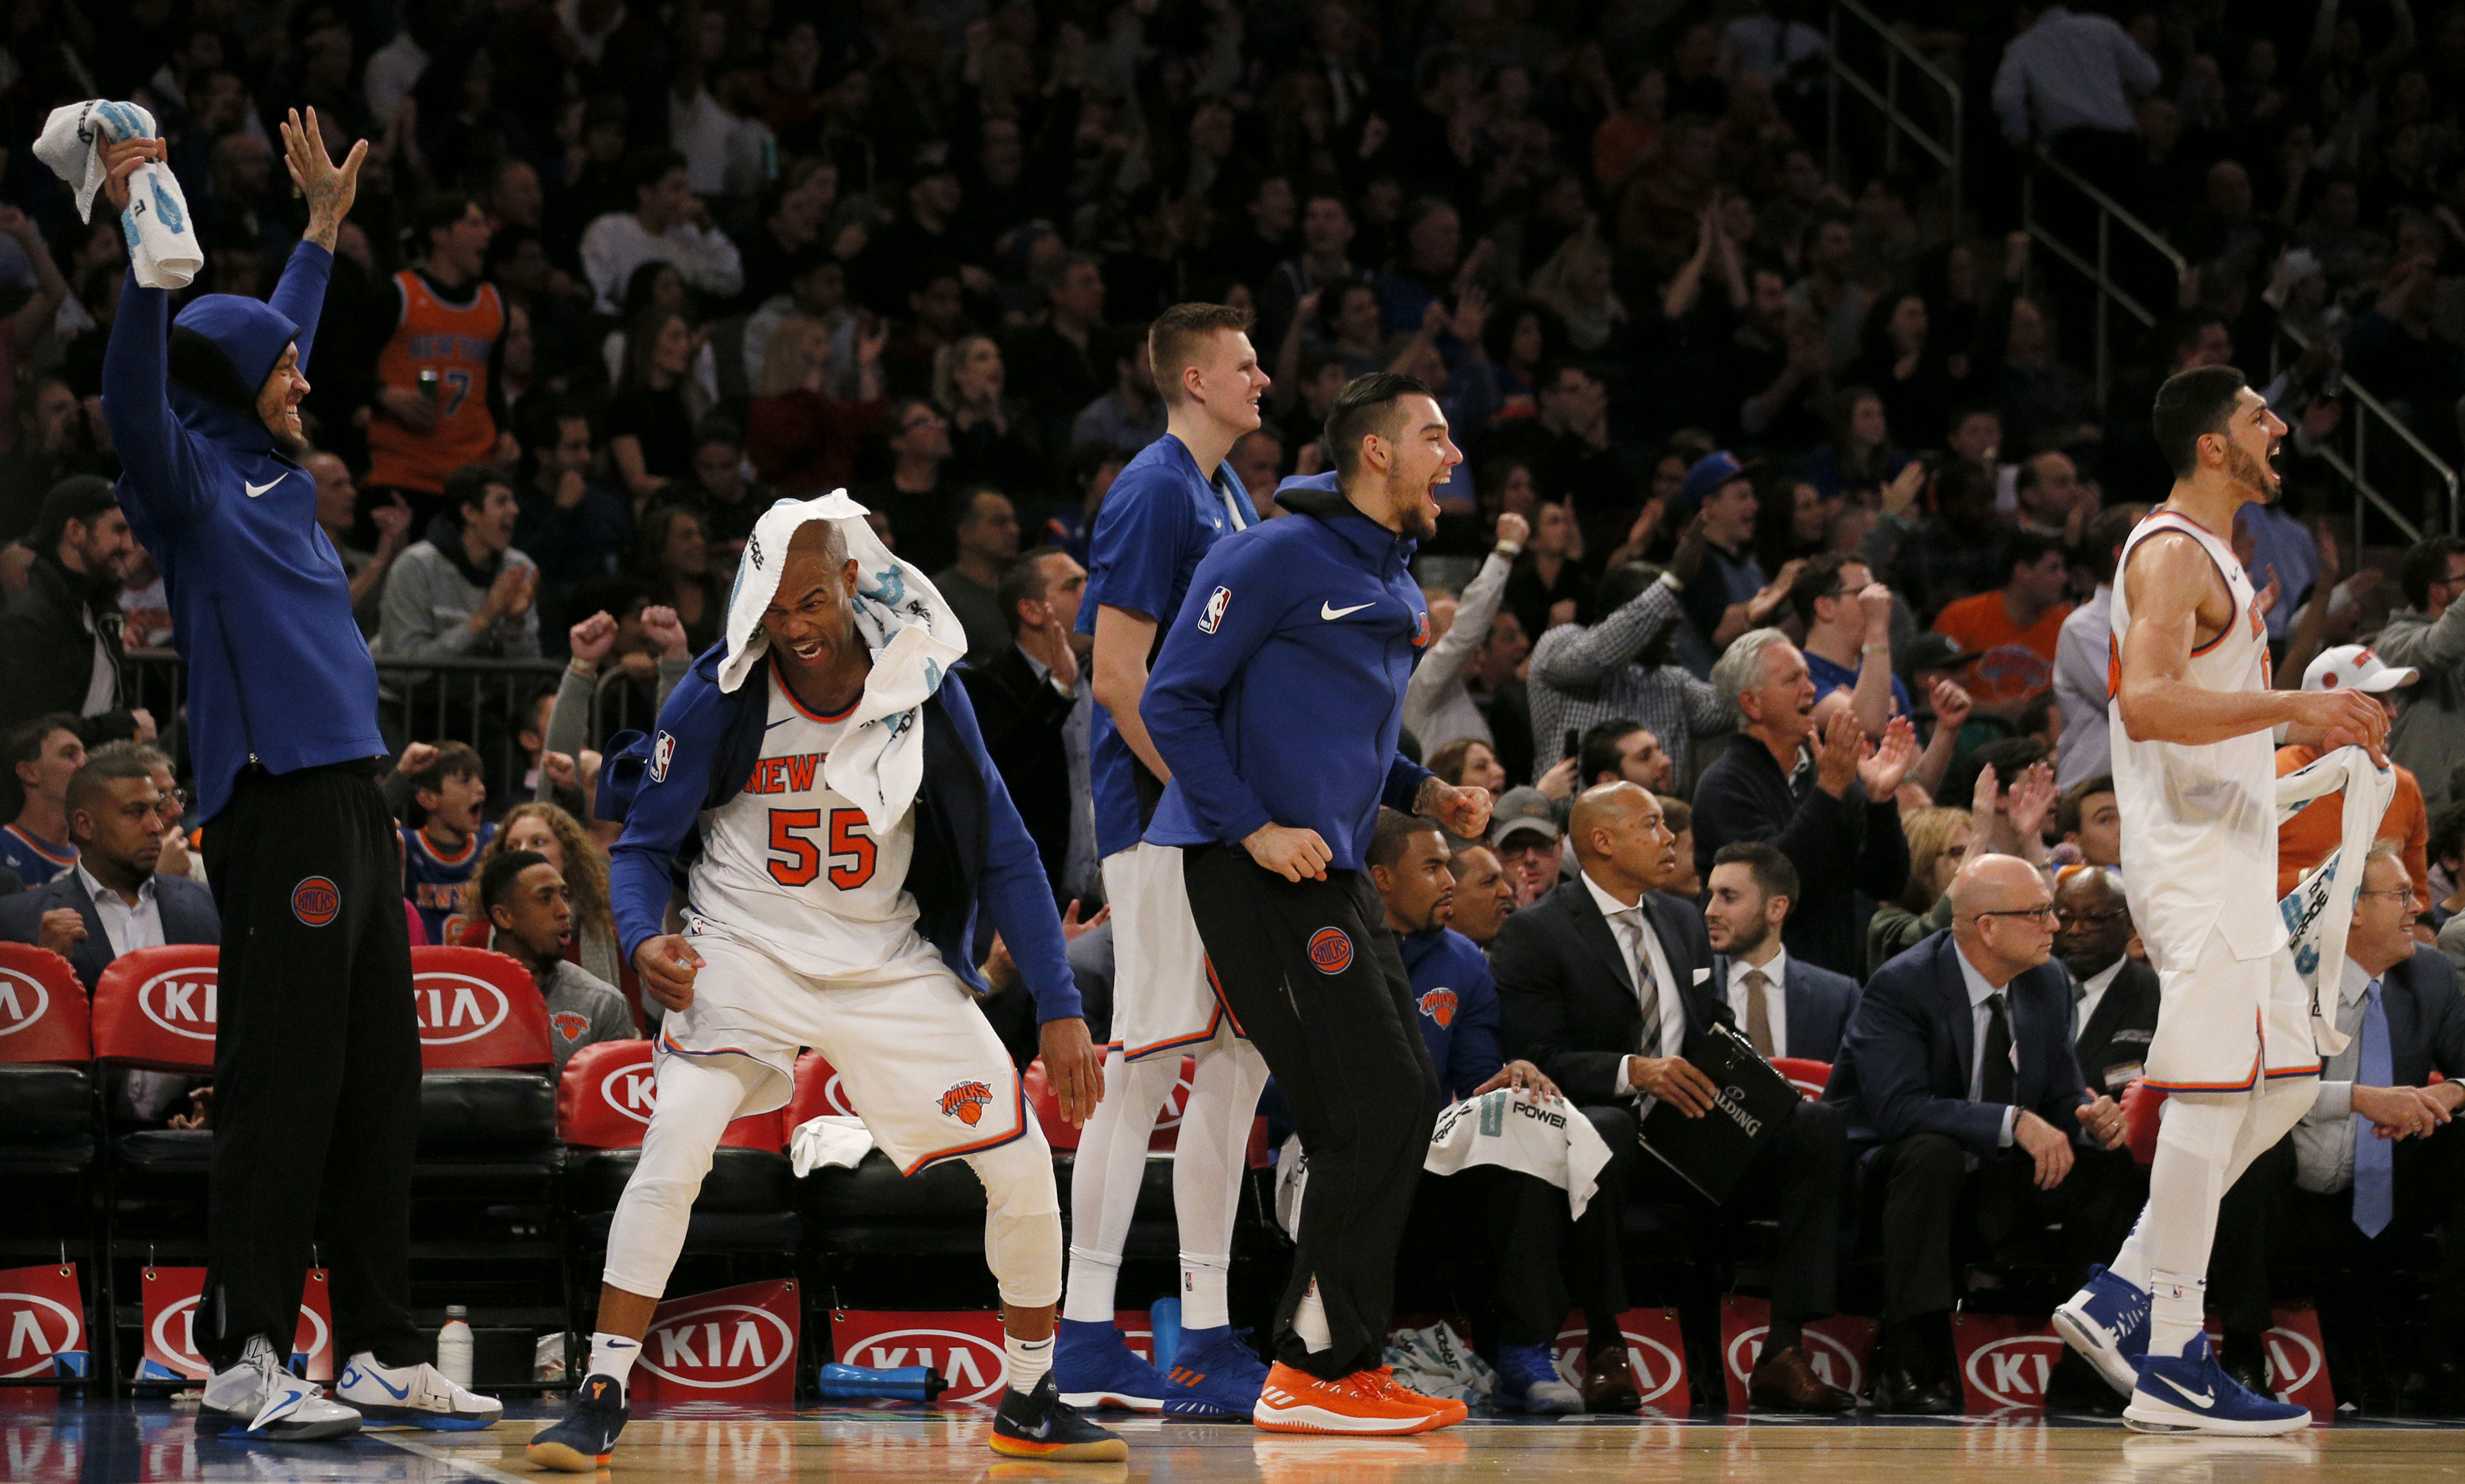 The New York Knicks have the most loyal fans in the NBA